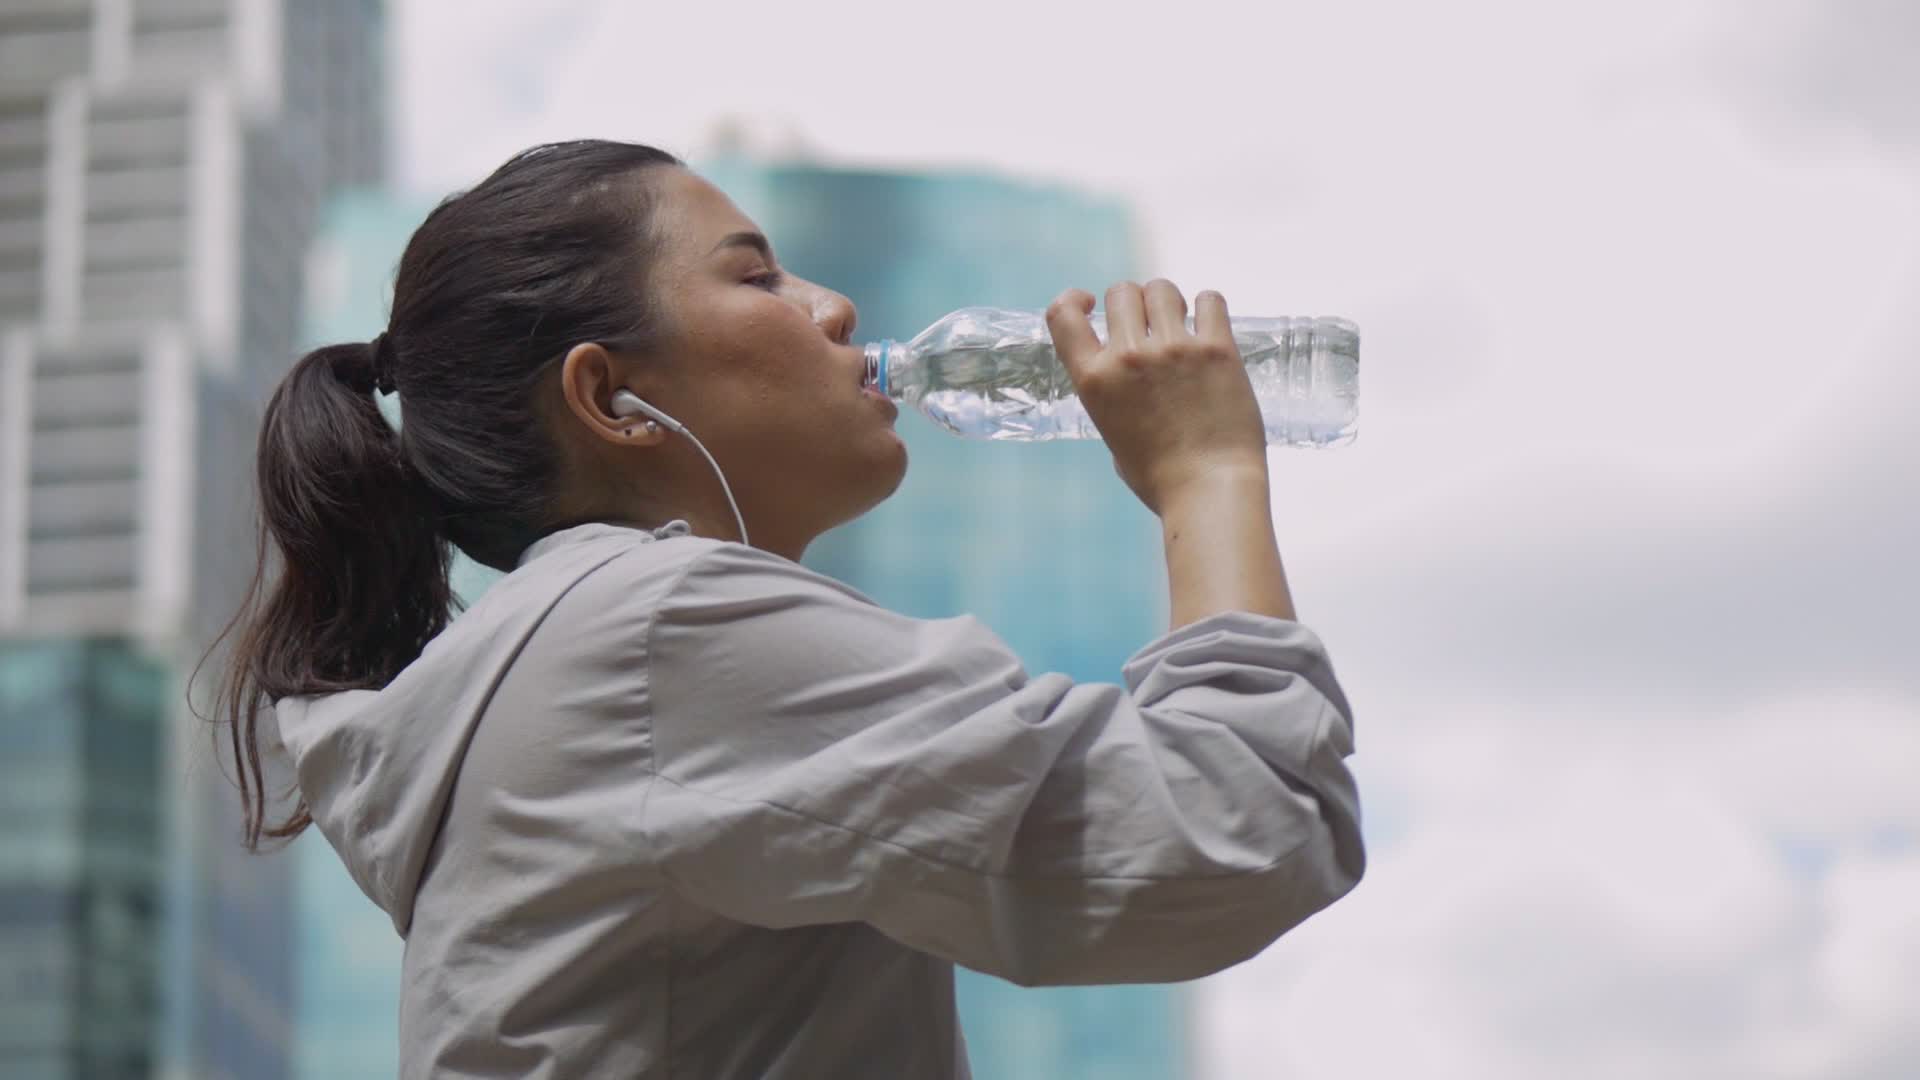 woman drinking water from plastic cup, isolated on a white